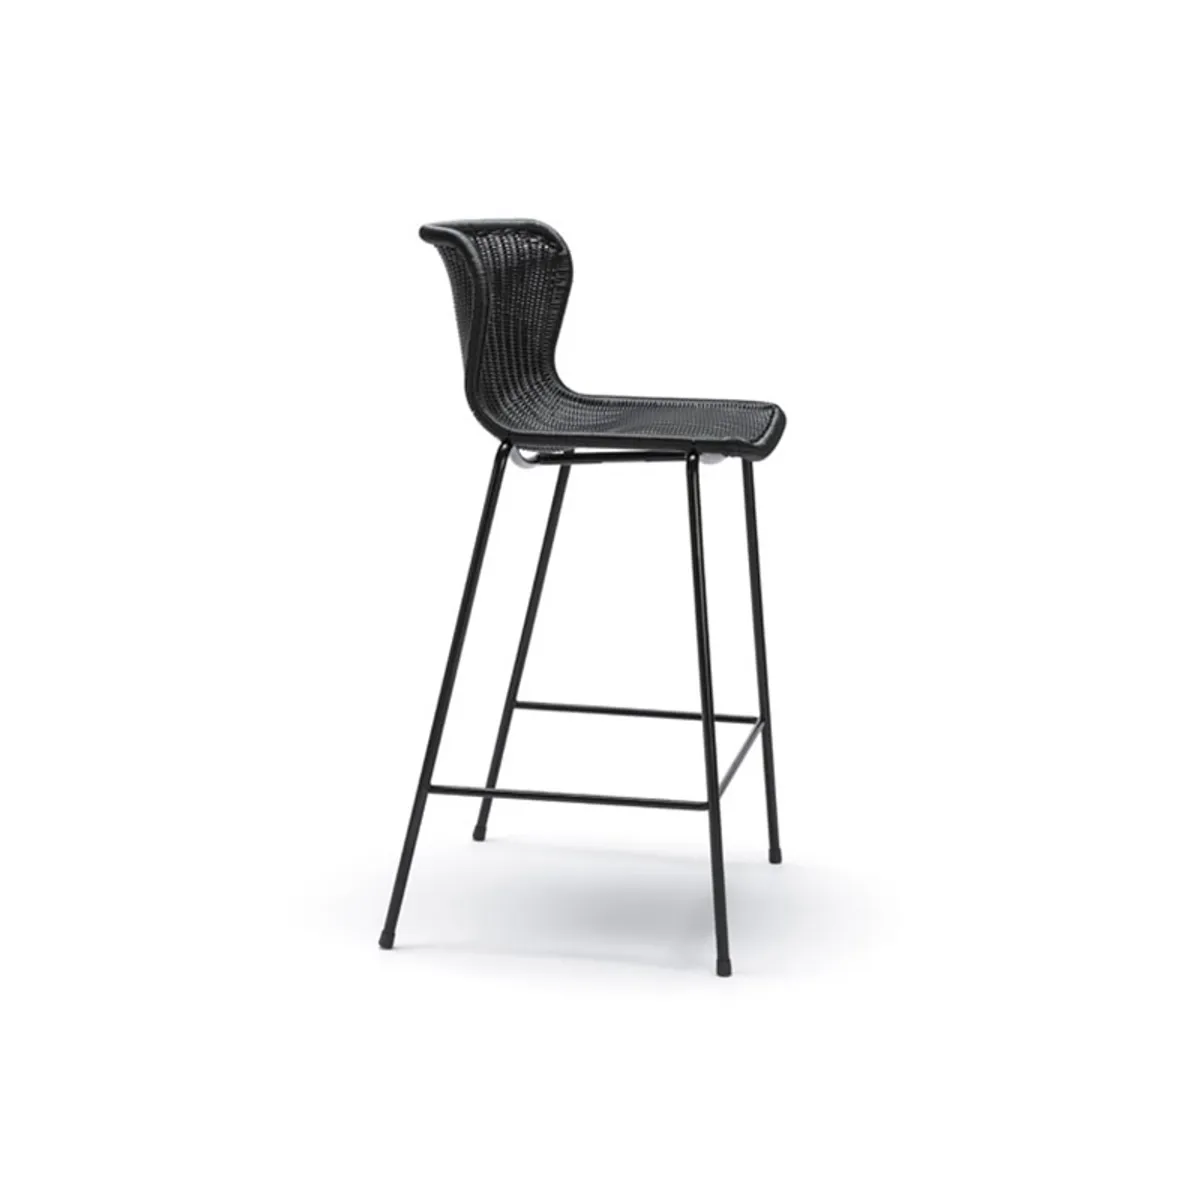 Harriet Bar Stool Wicker Seat With Metal Legs For Outdoor Use 017